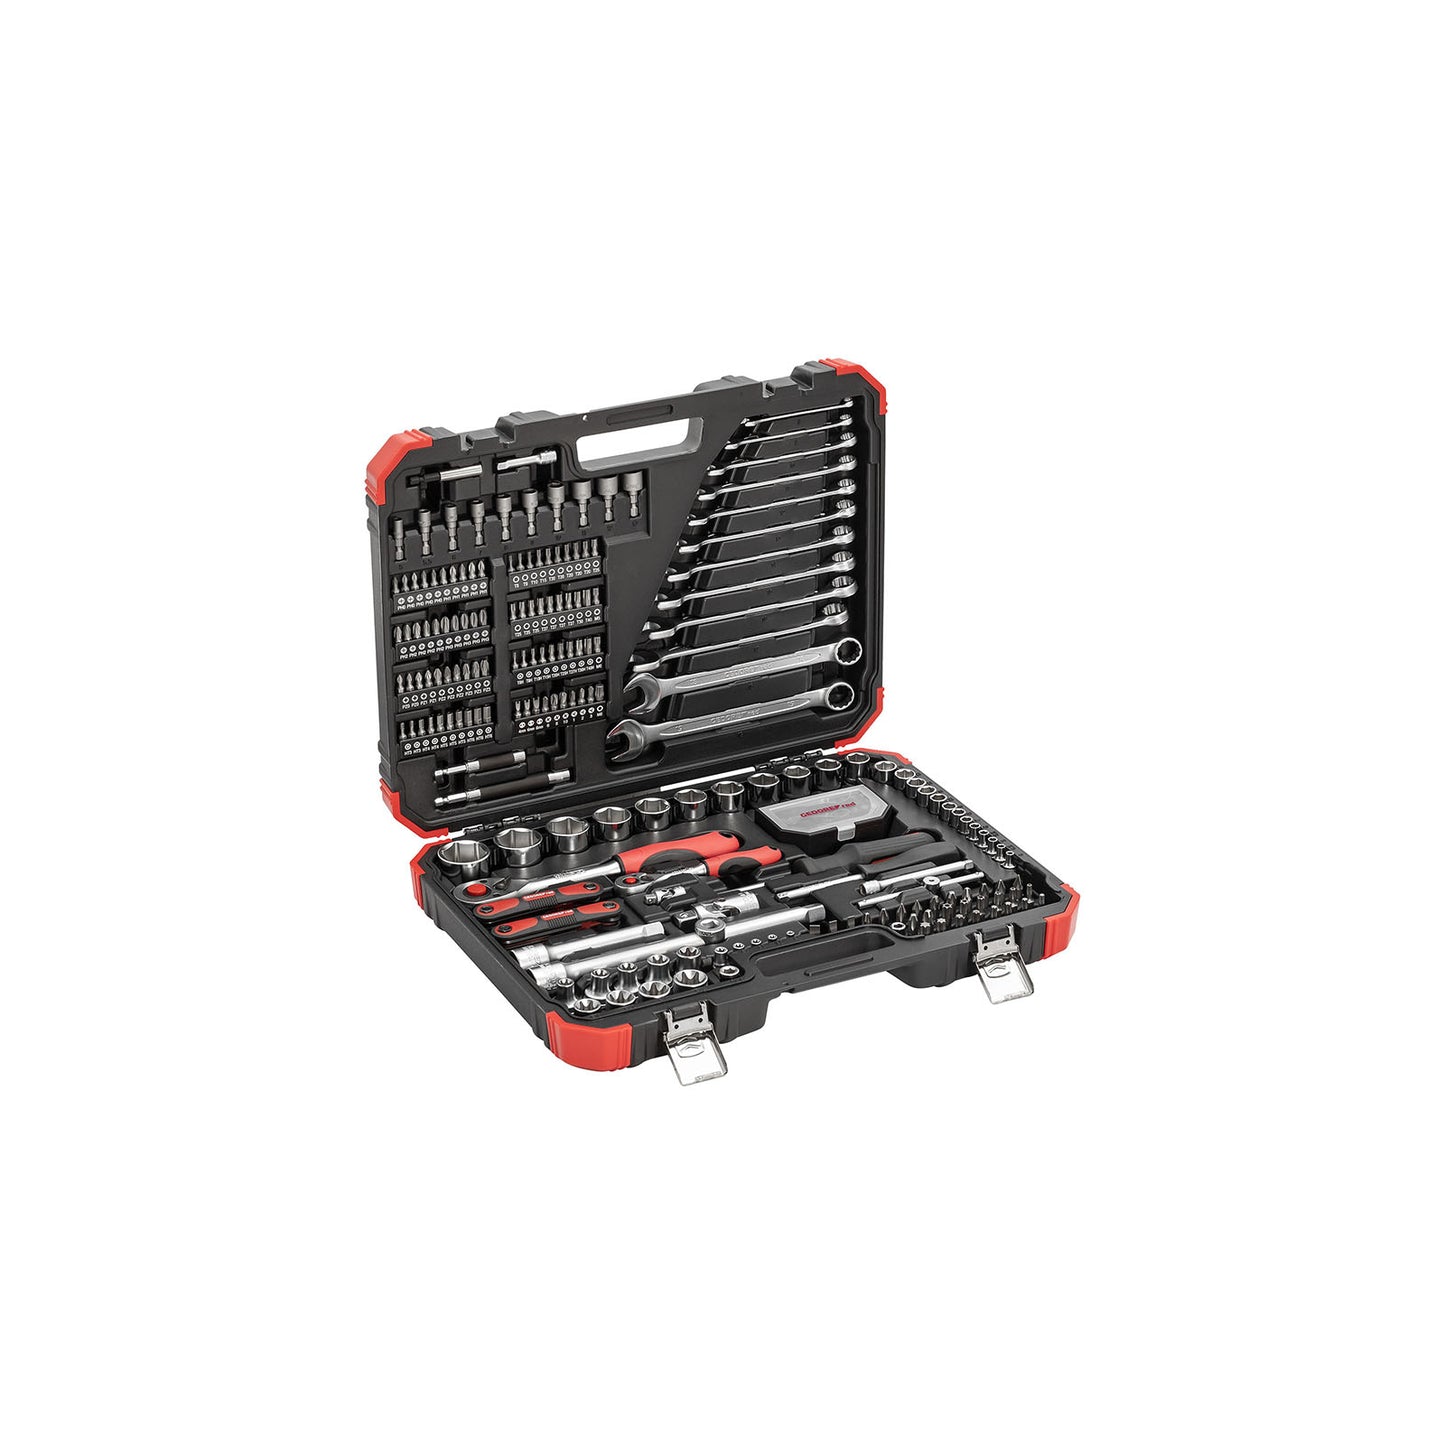 GEDORE red R46003232 - 1/4"+1/2" socket set 232 pieces (3300185)